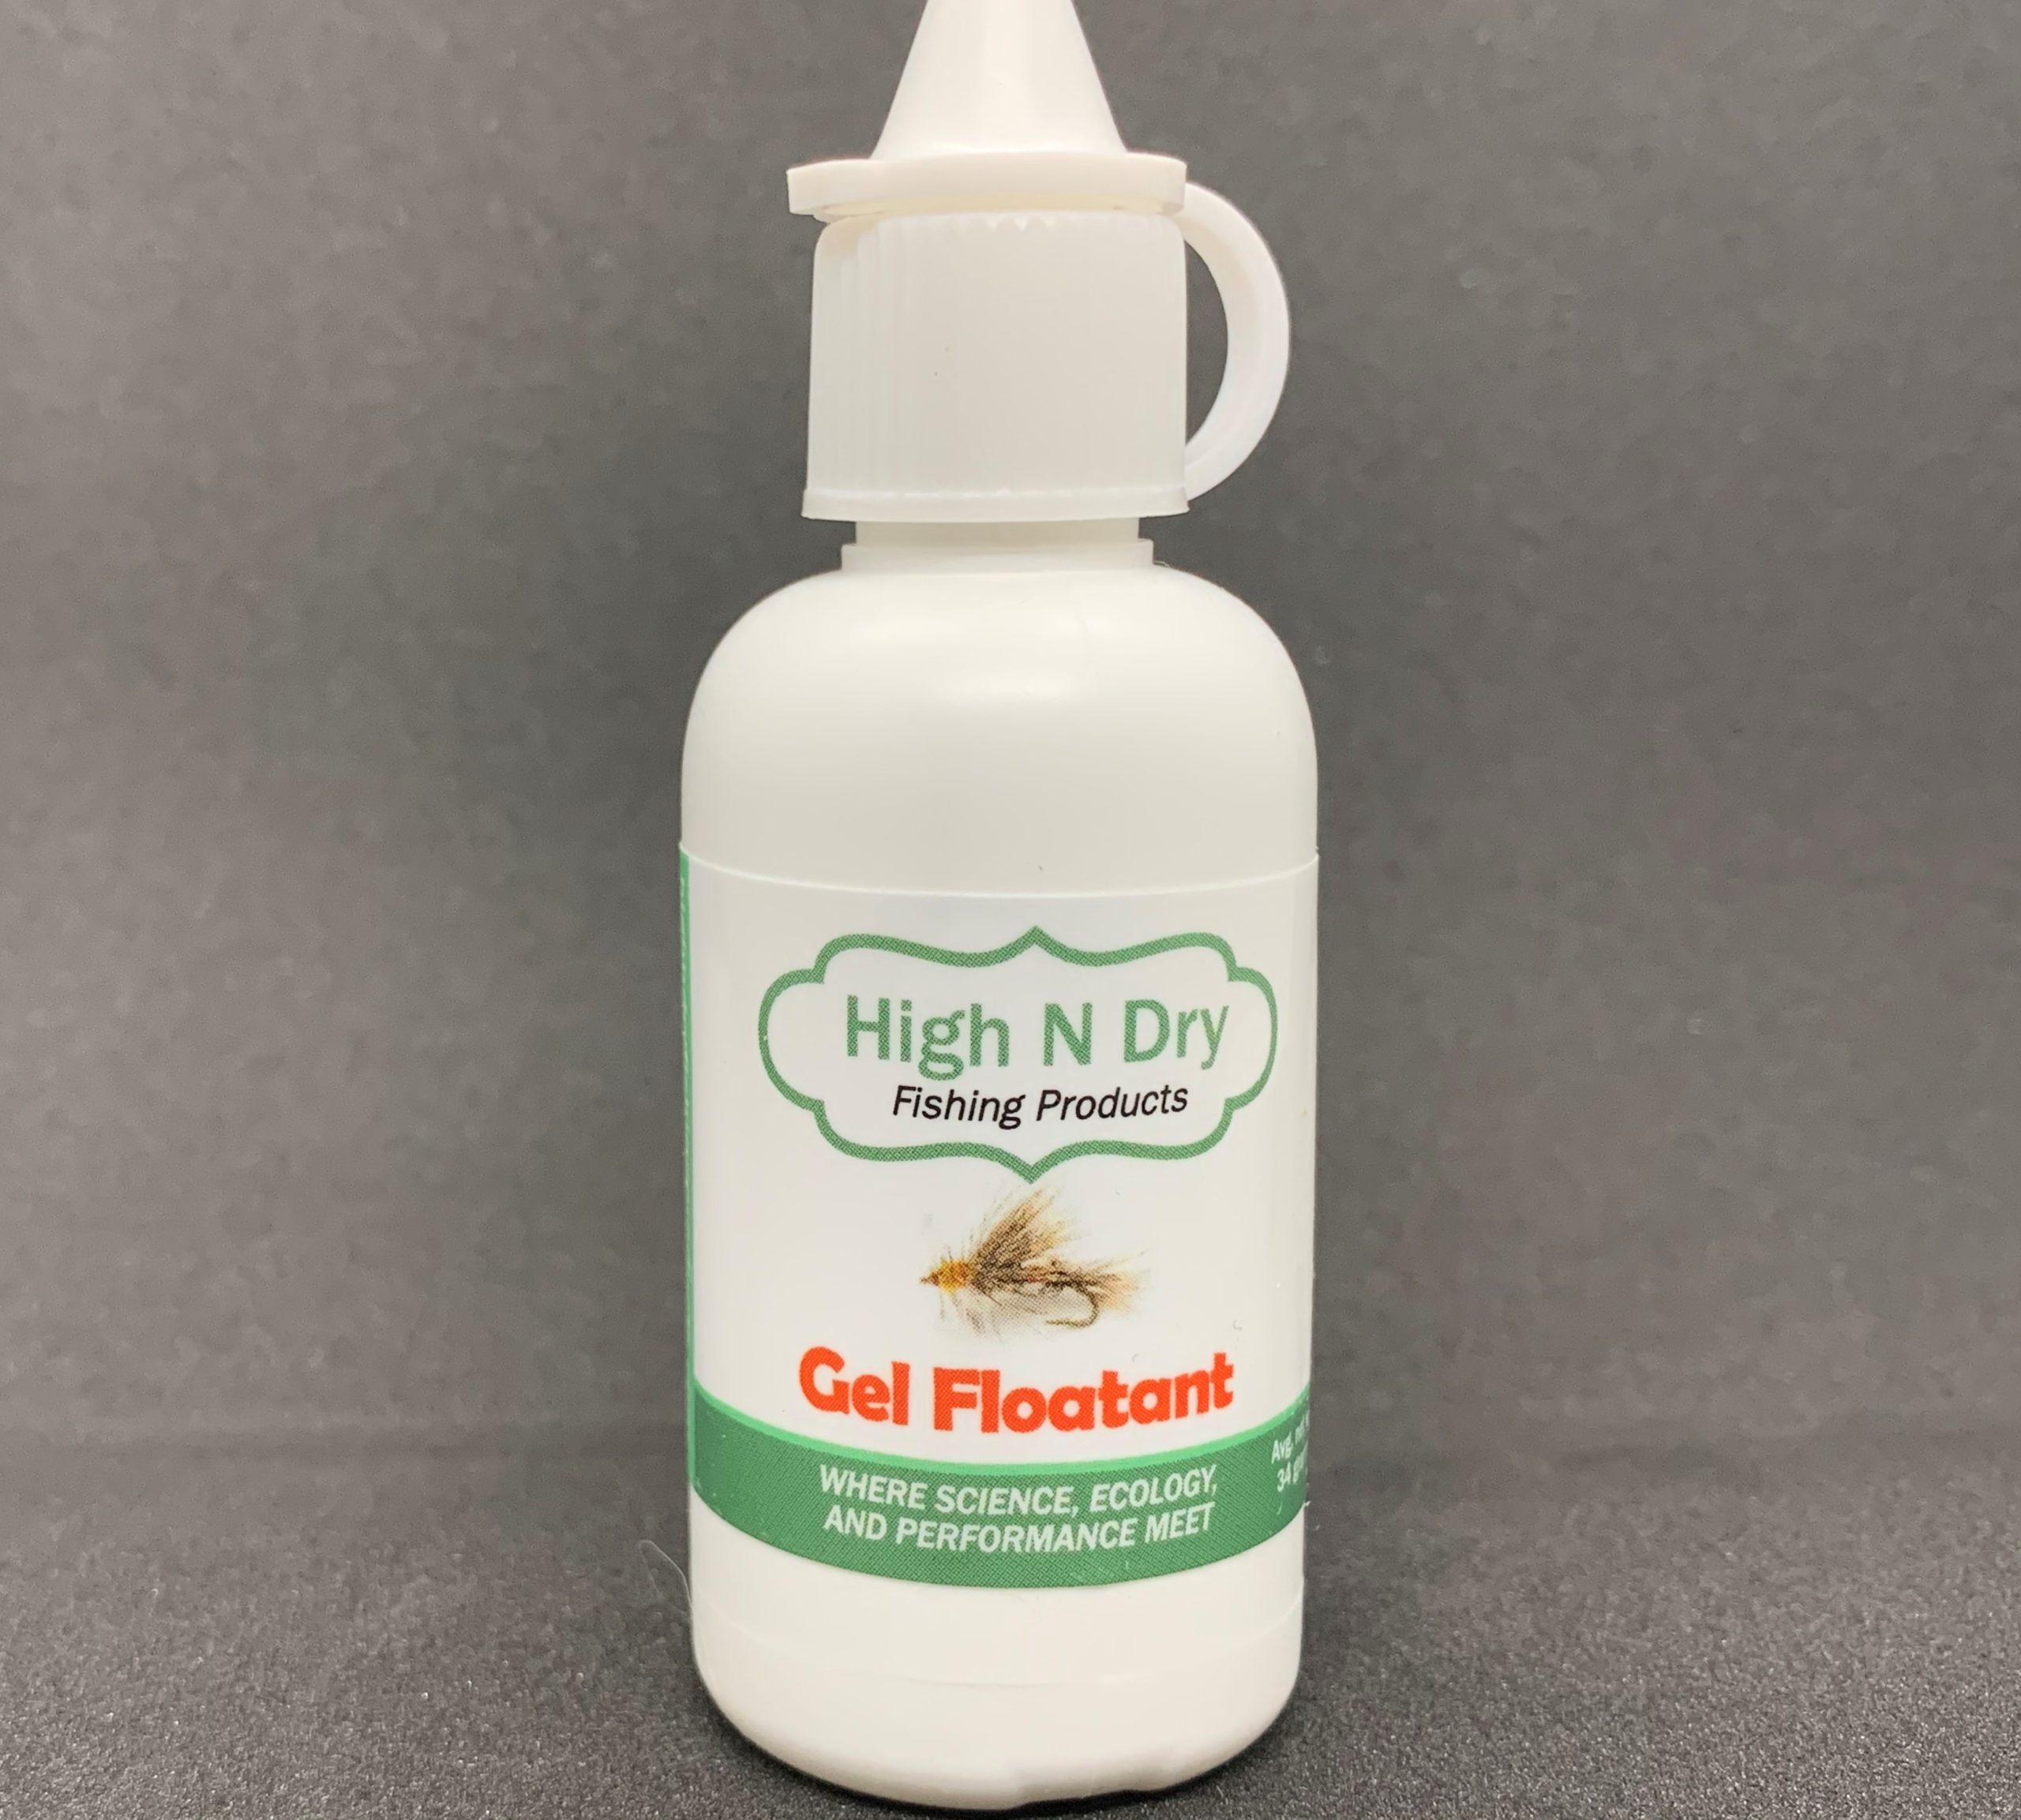 High N Dry Fishing Products  Quality & Environmentally Friendly Floatants